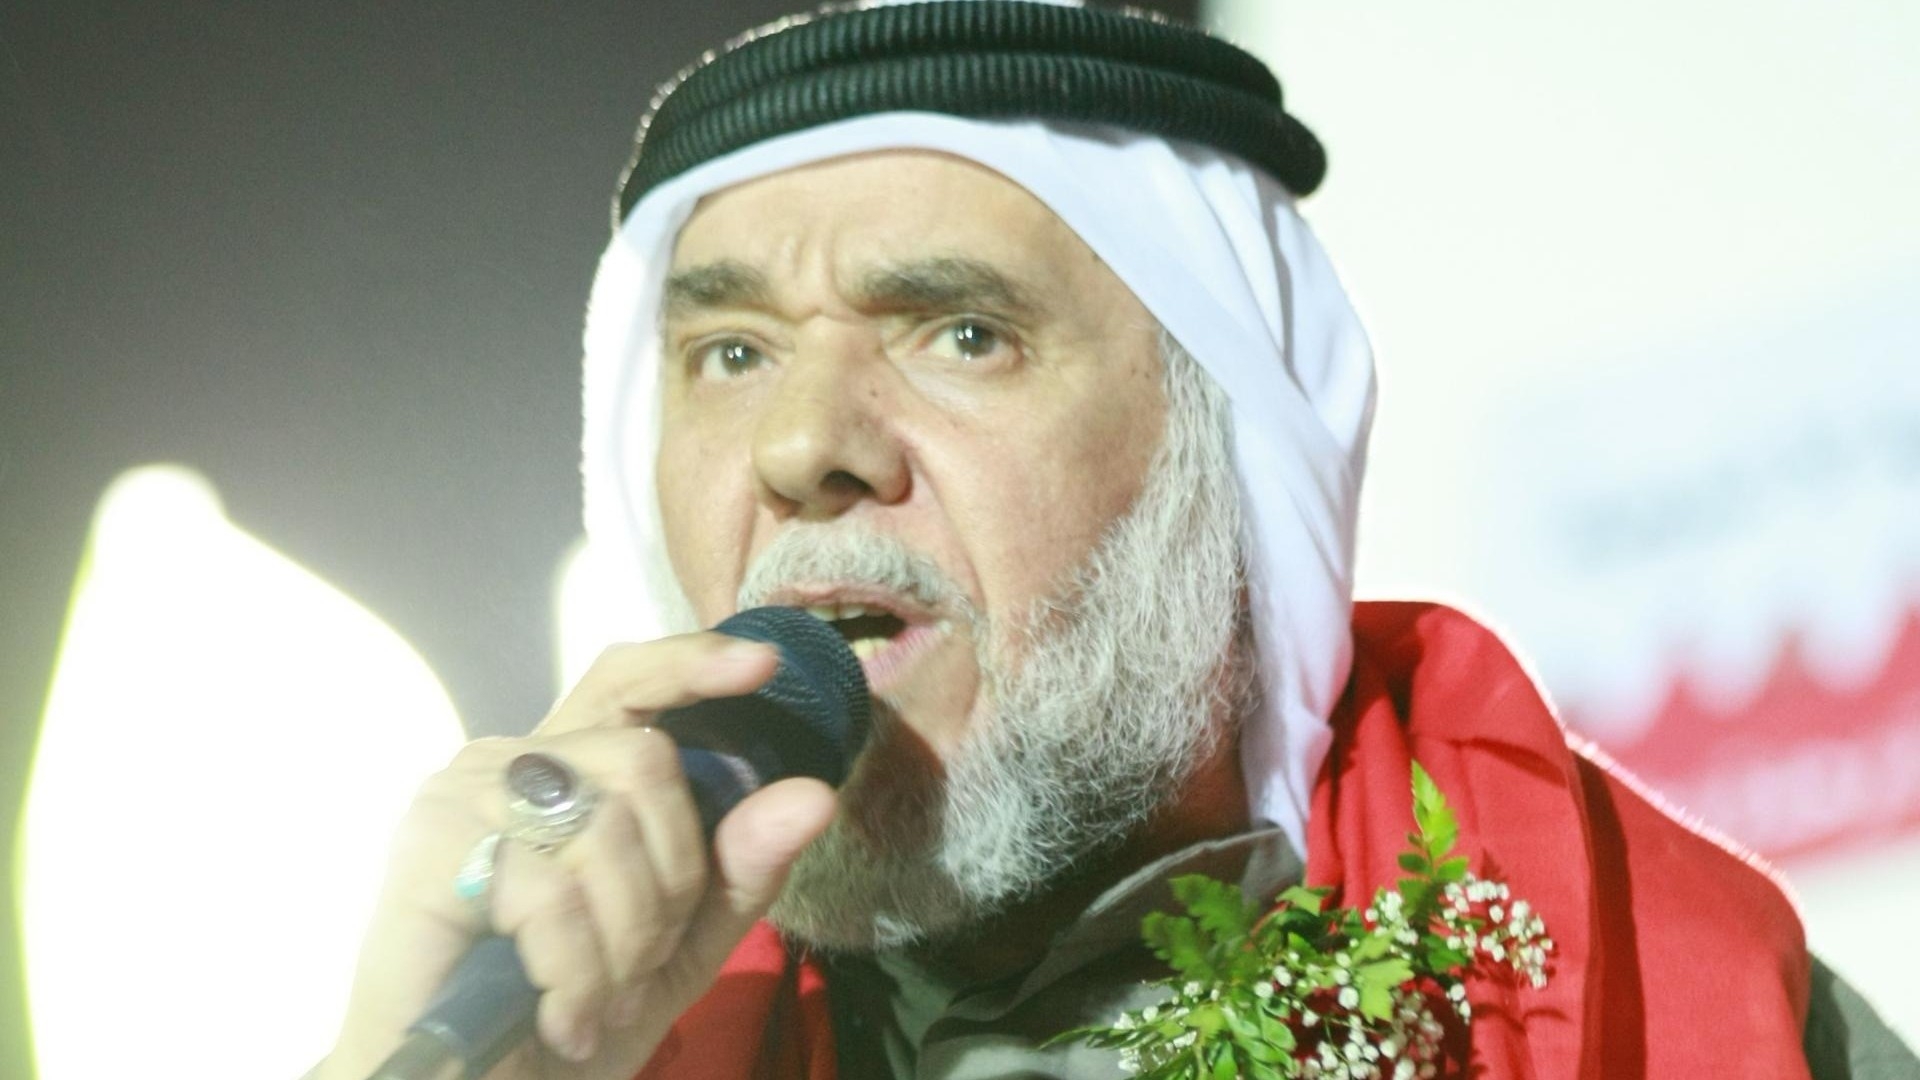 Hassan Mushaima addresses a crowd at the Pearl Roundabout in Manama in February 2011 (BIRD) 